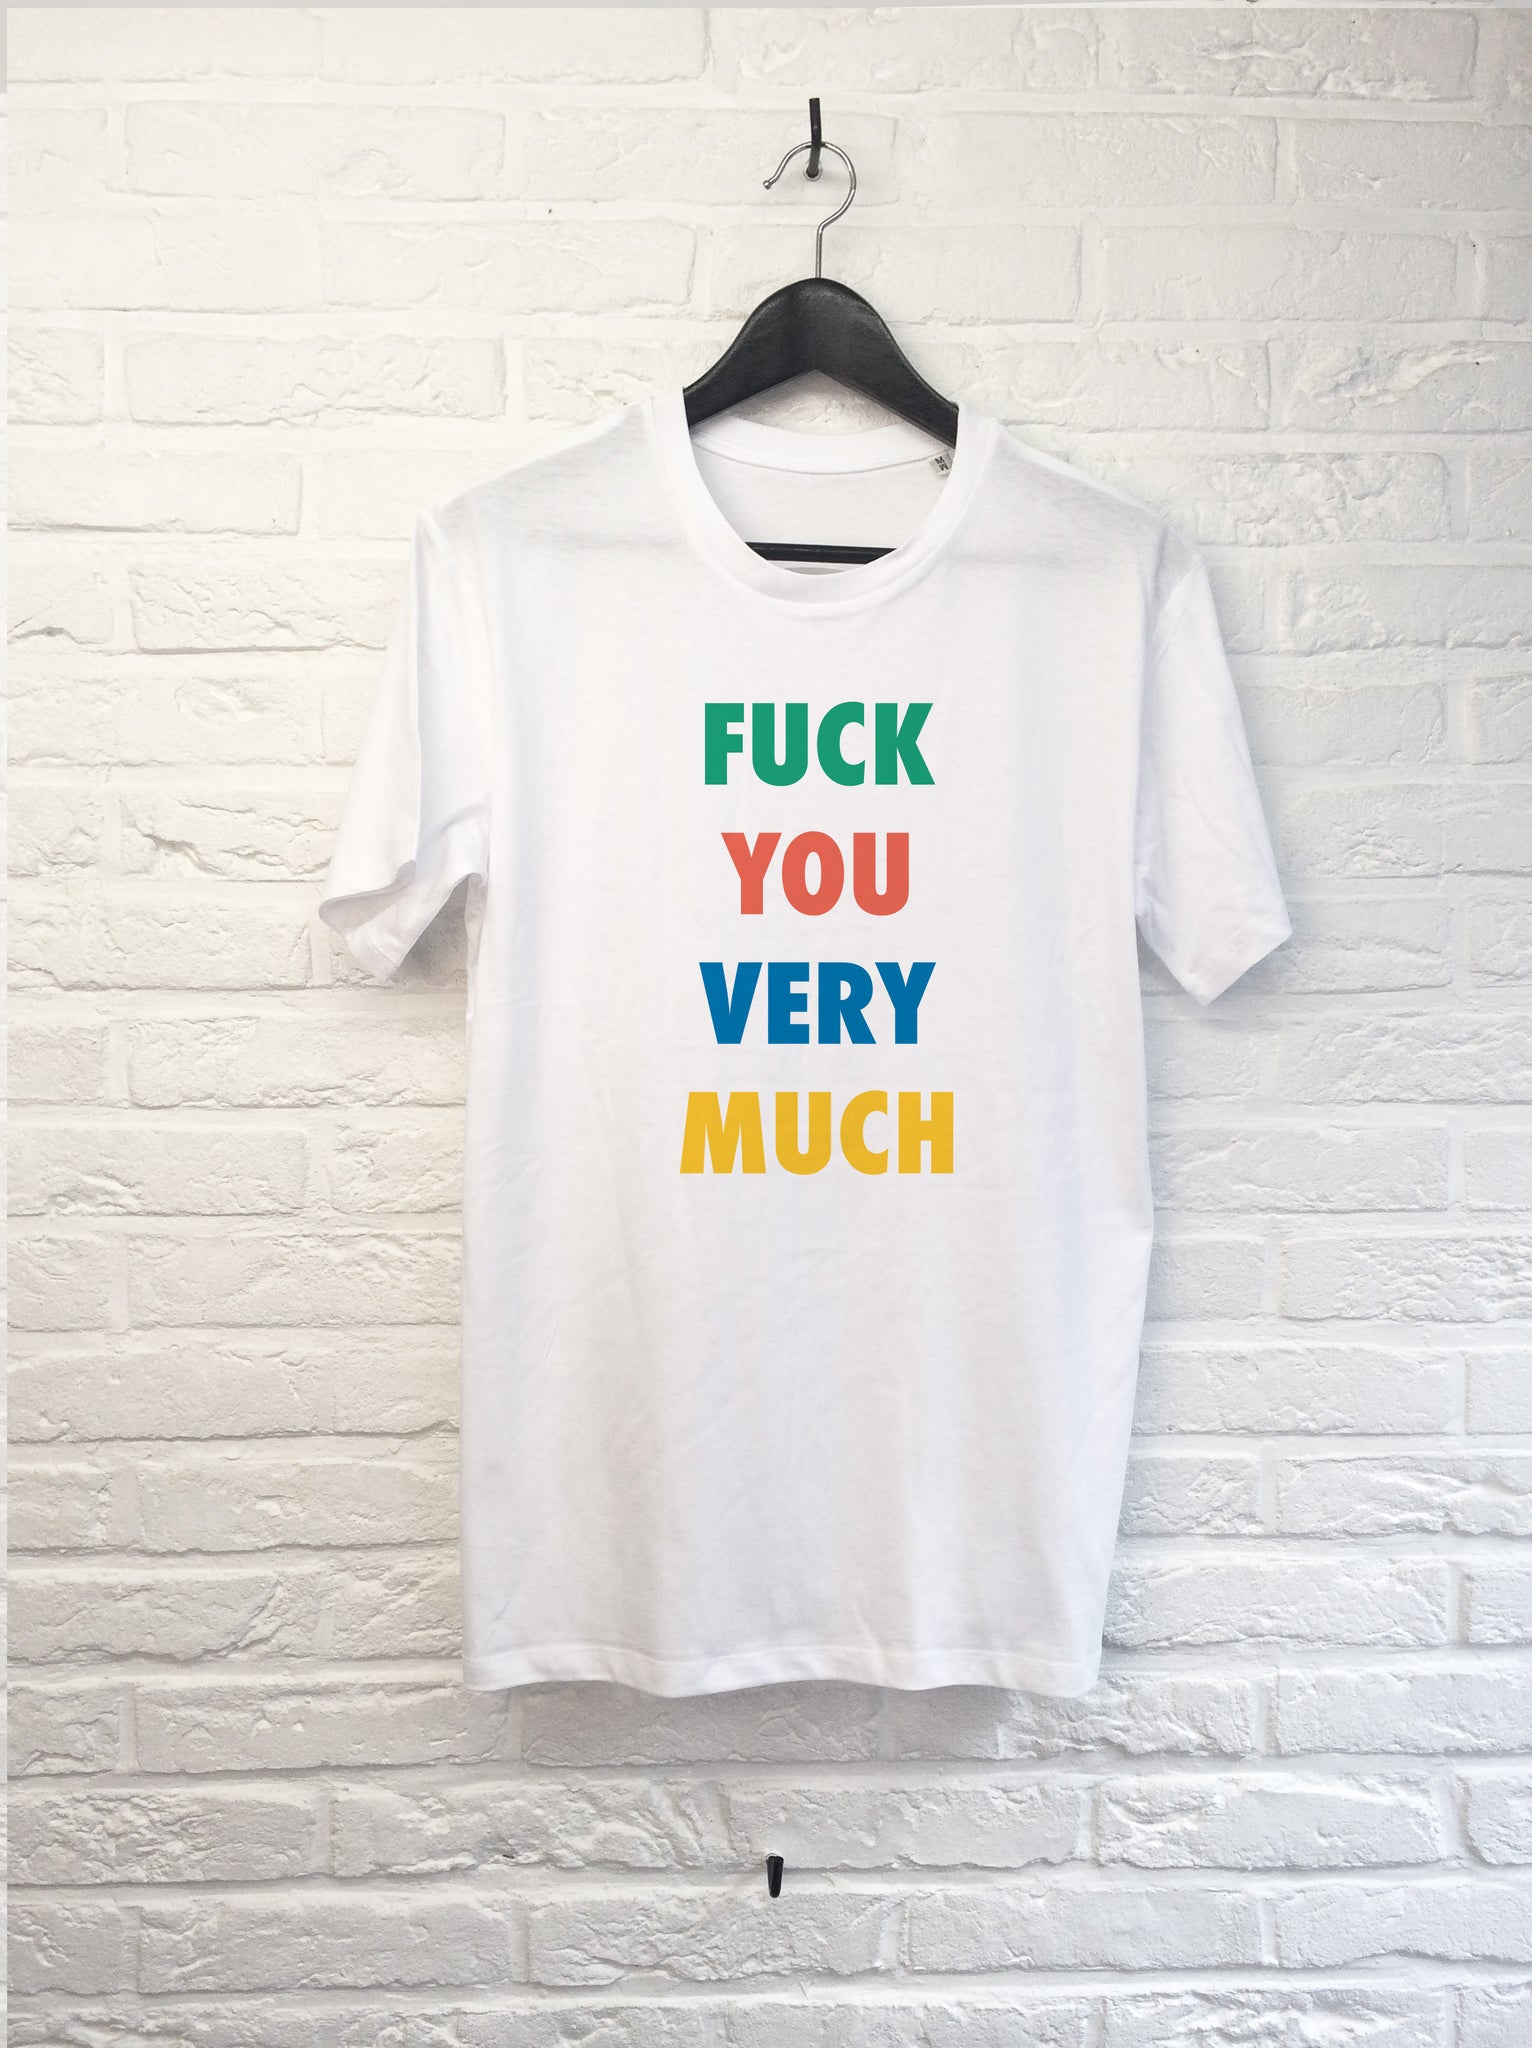 F*** you very much-T shirt-Atelier Amelot